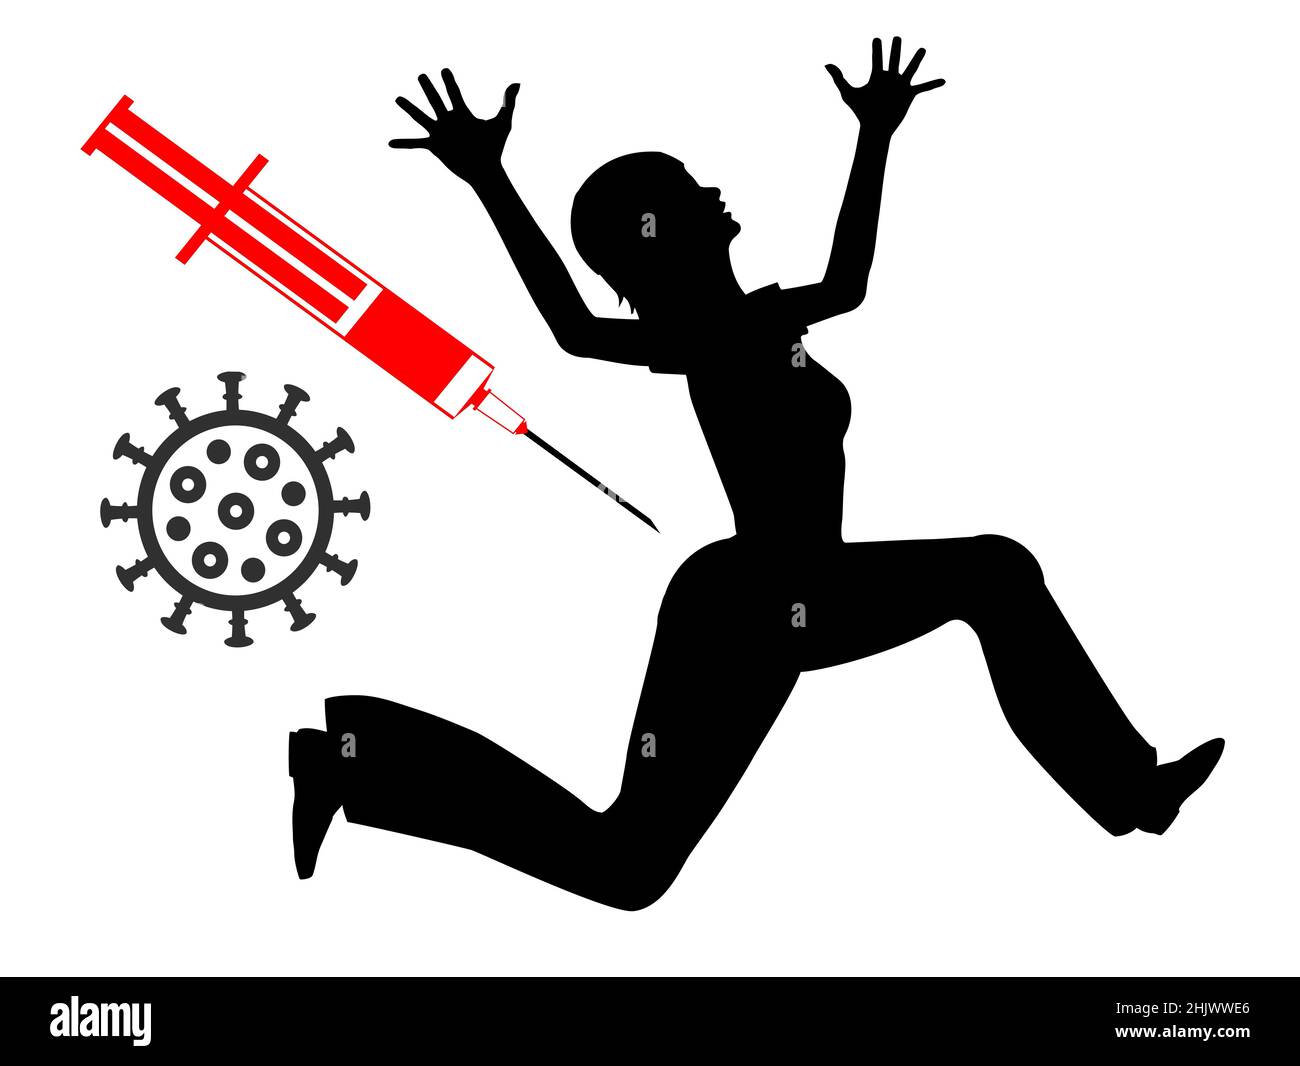 The fear of injections drives woman in panic away from getting vaccinated. Stock Photo